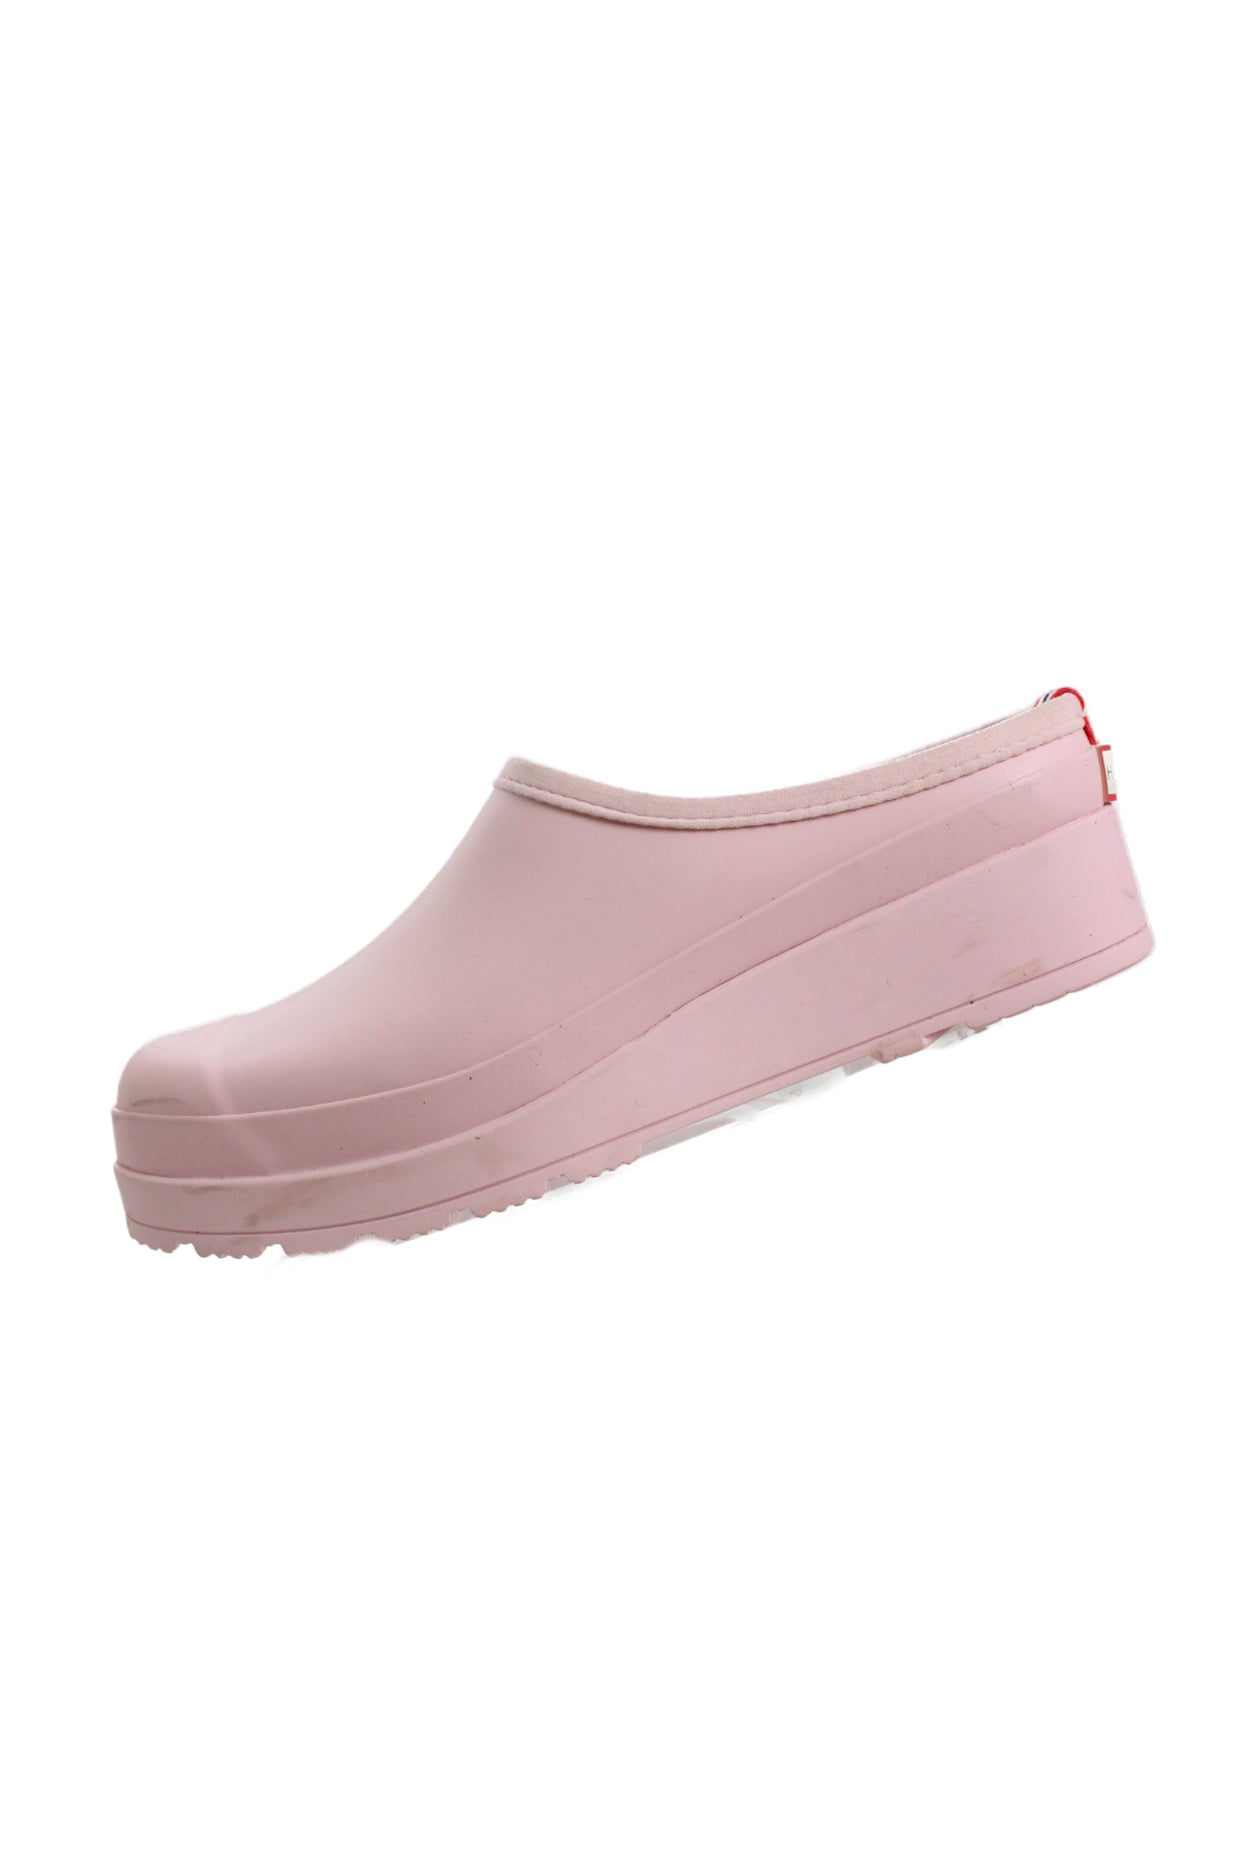 description: hunter light pink rubber clogs. features rounded toe silhouette, slip-on style, and hunter branding striped at back. 